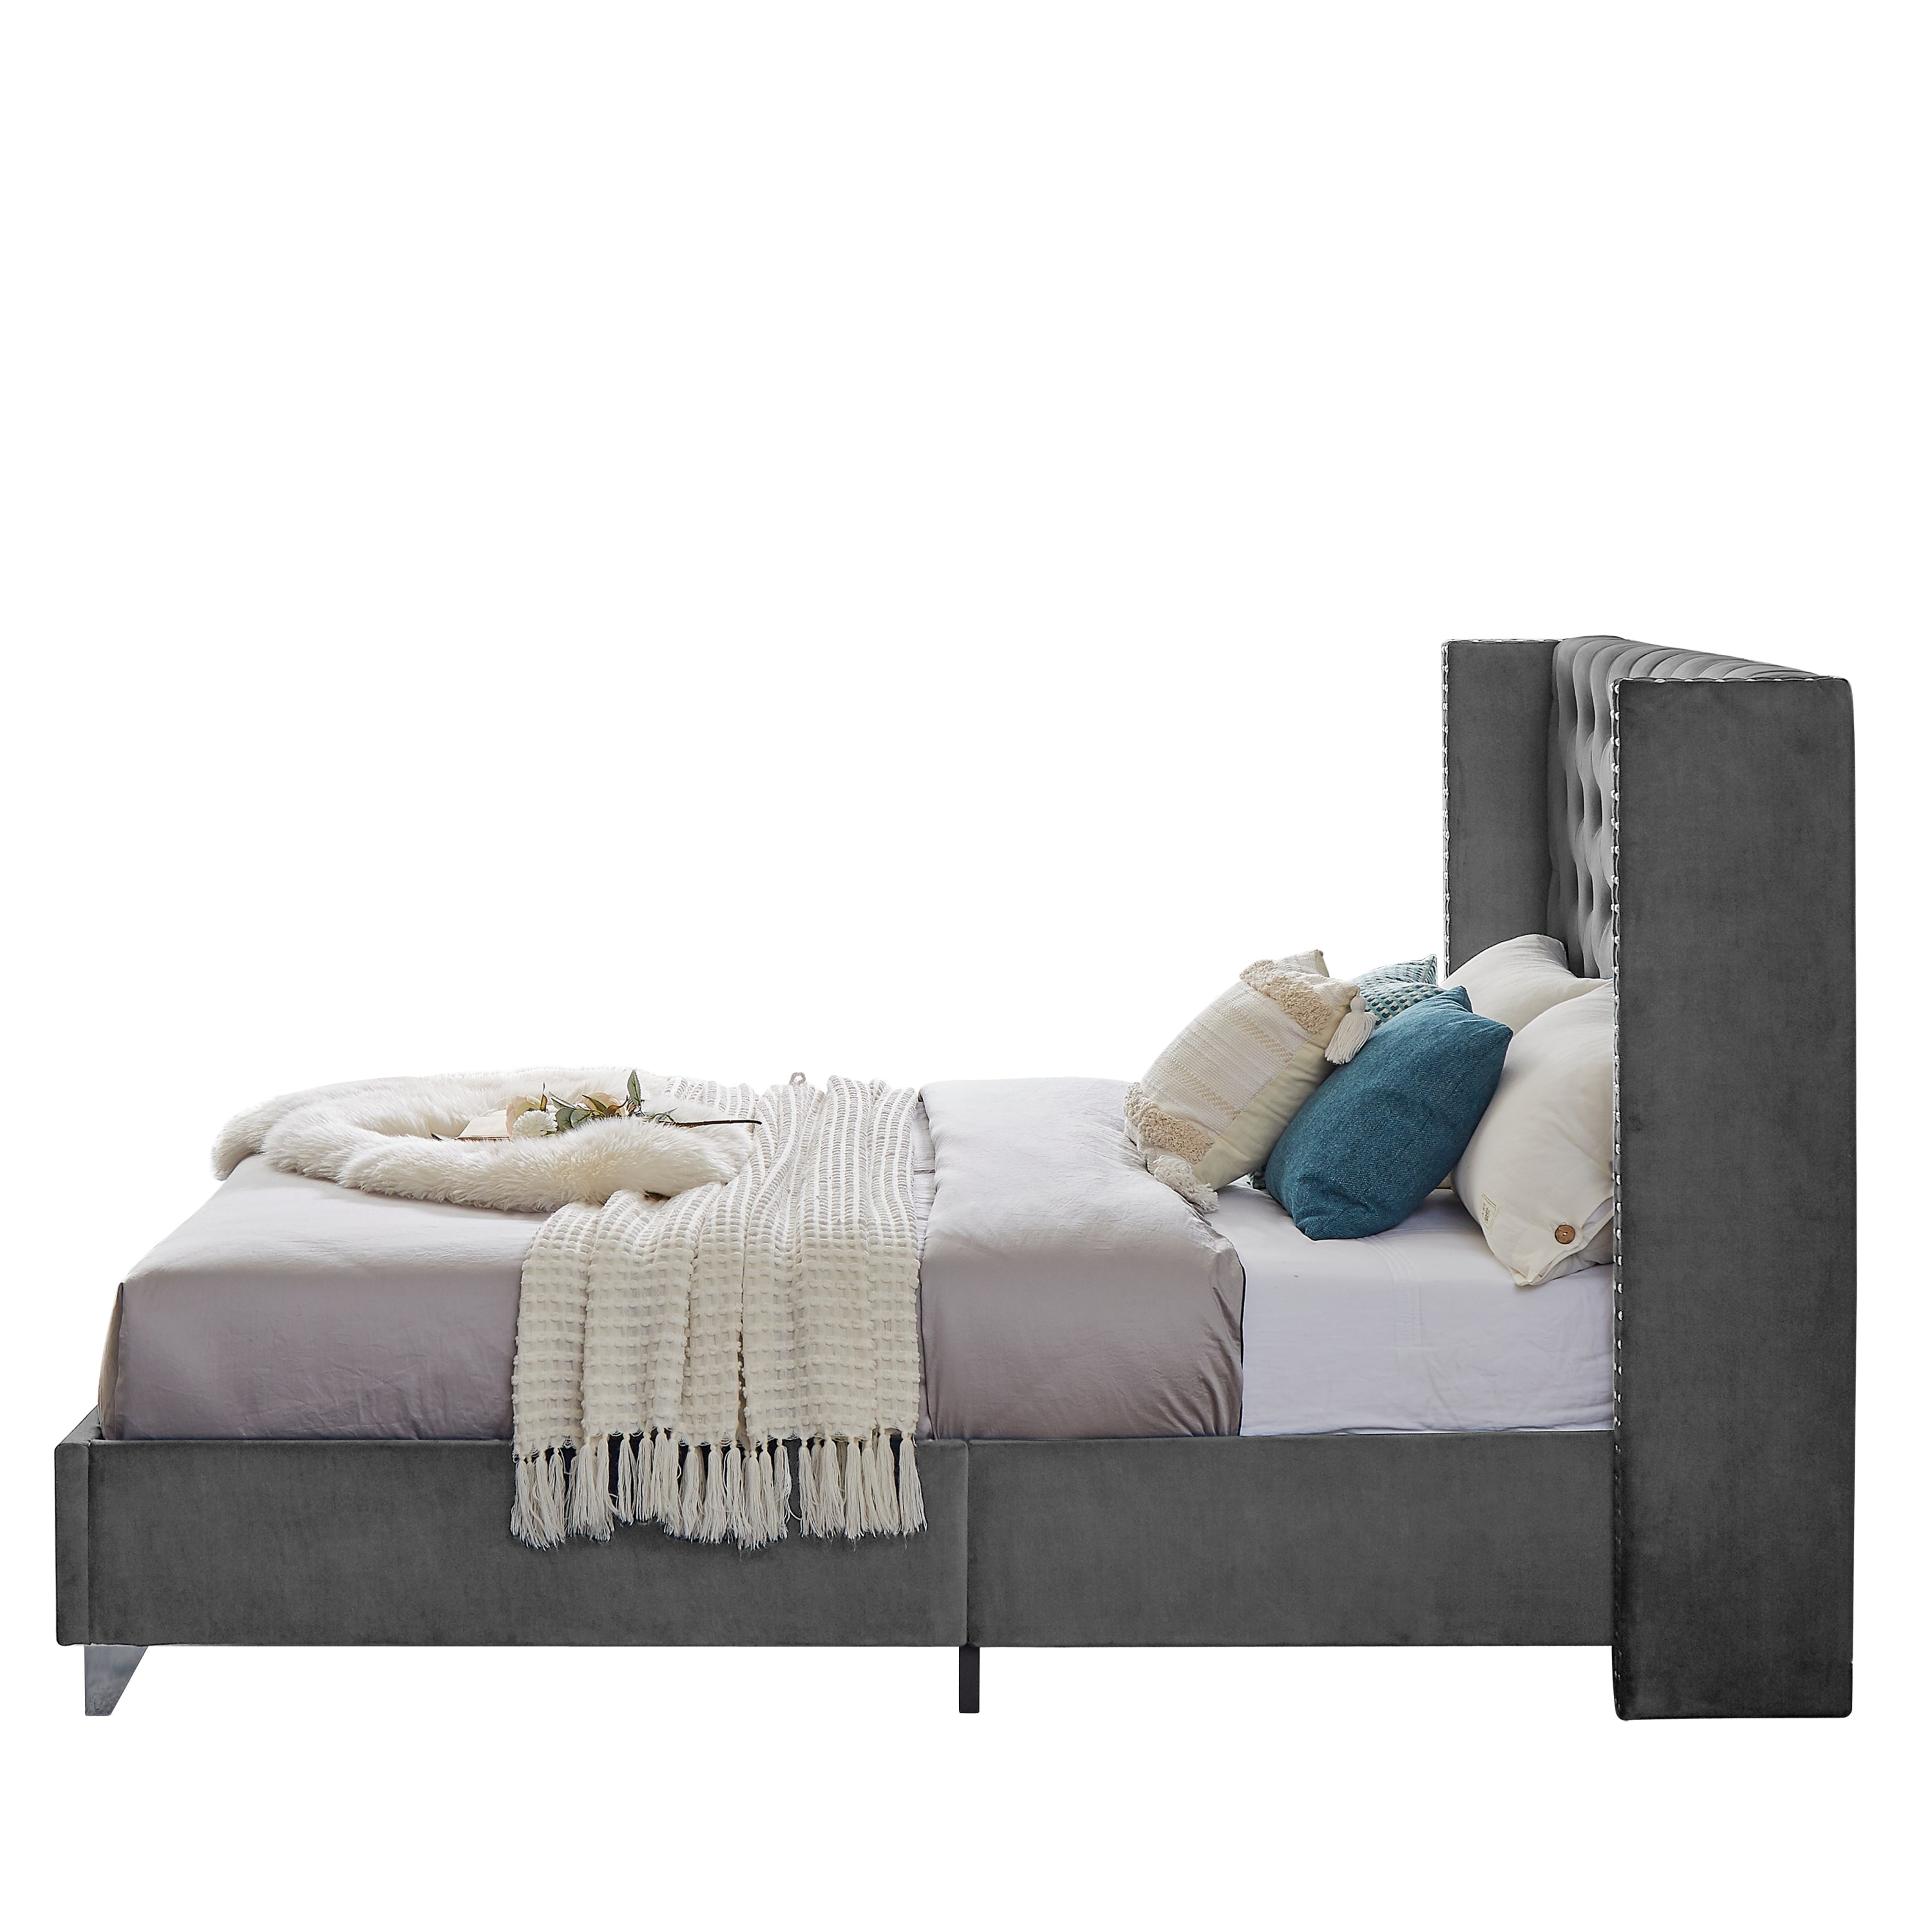 Upholstered Queen Headboard Bed with Wooden Slats By: Alabama Beds